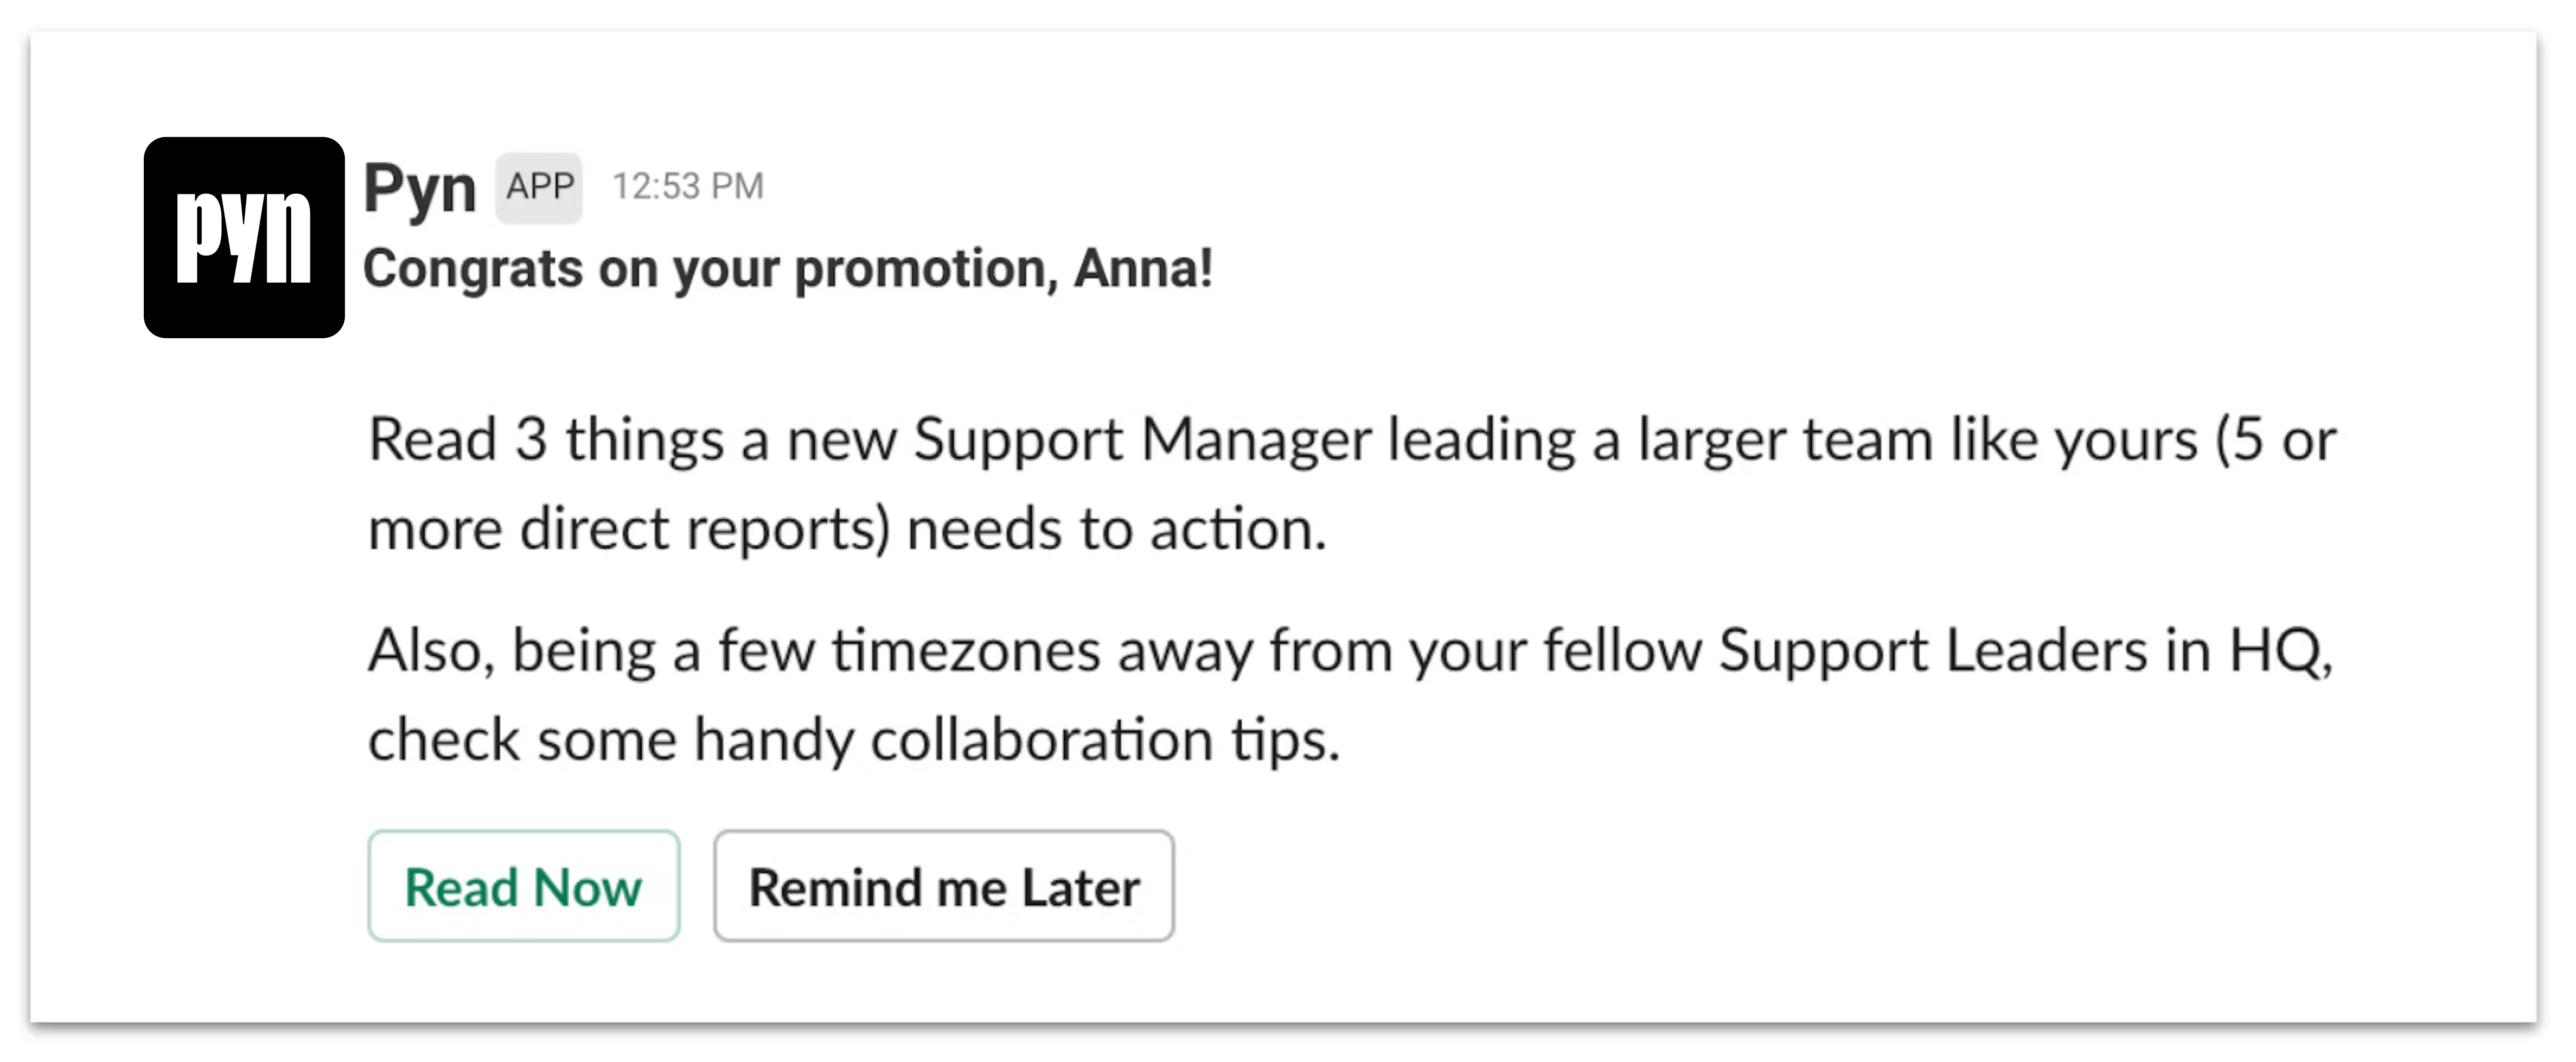 Automated Slack message supporting a newly promoted employee from Pyn